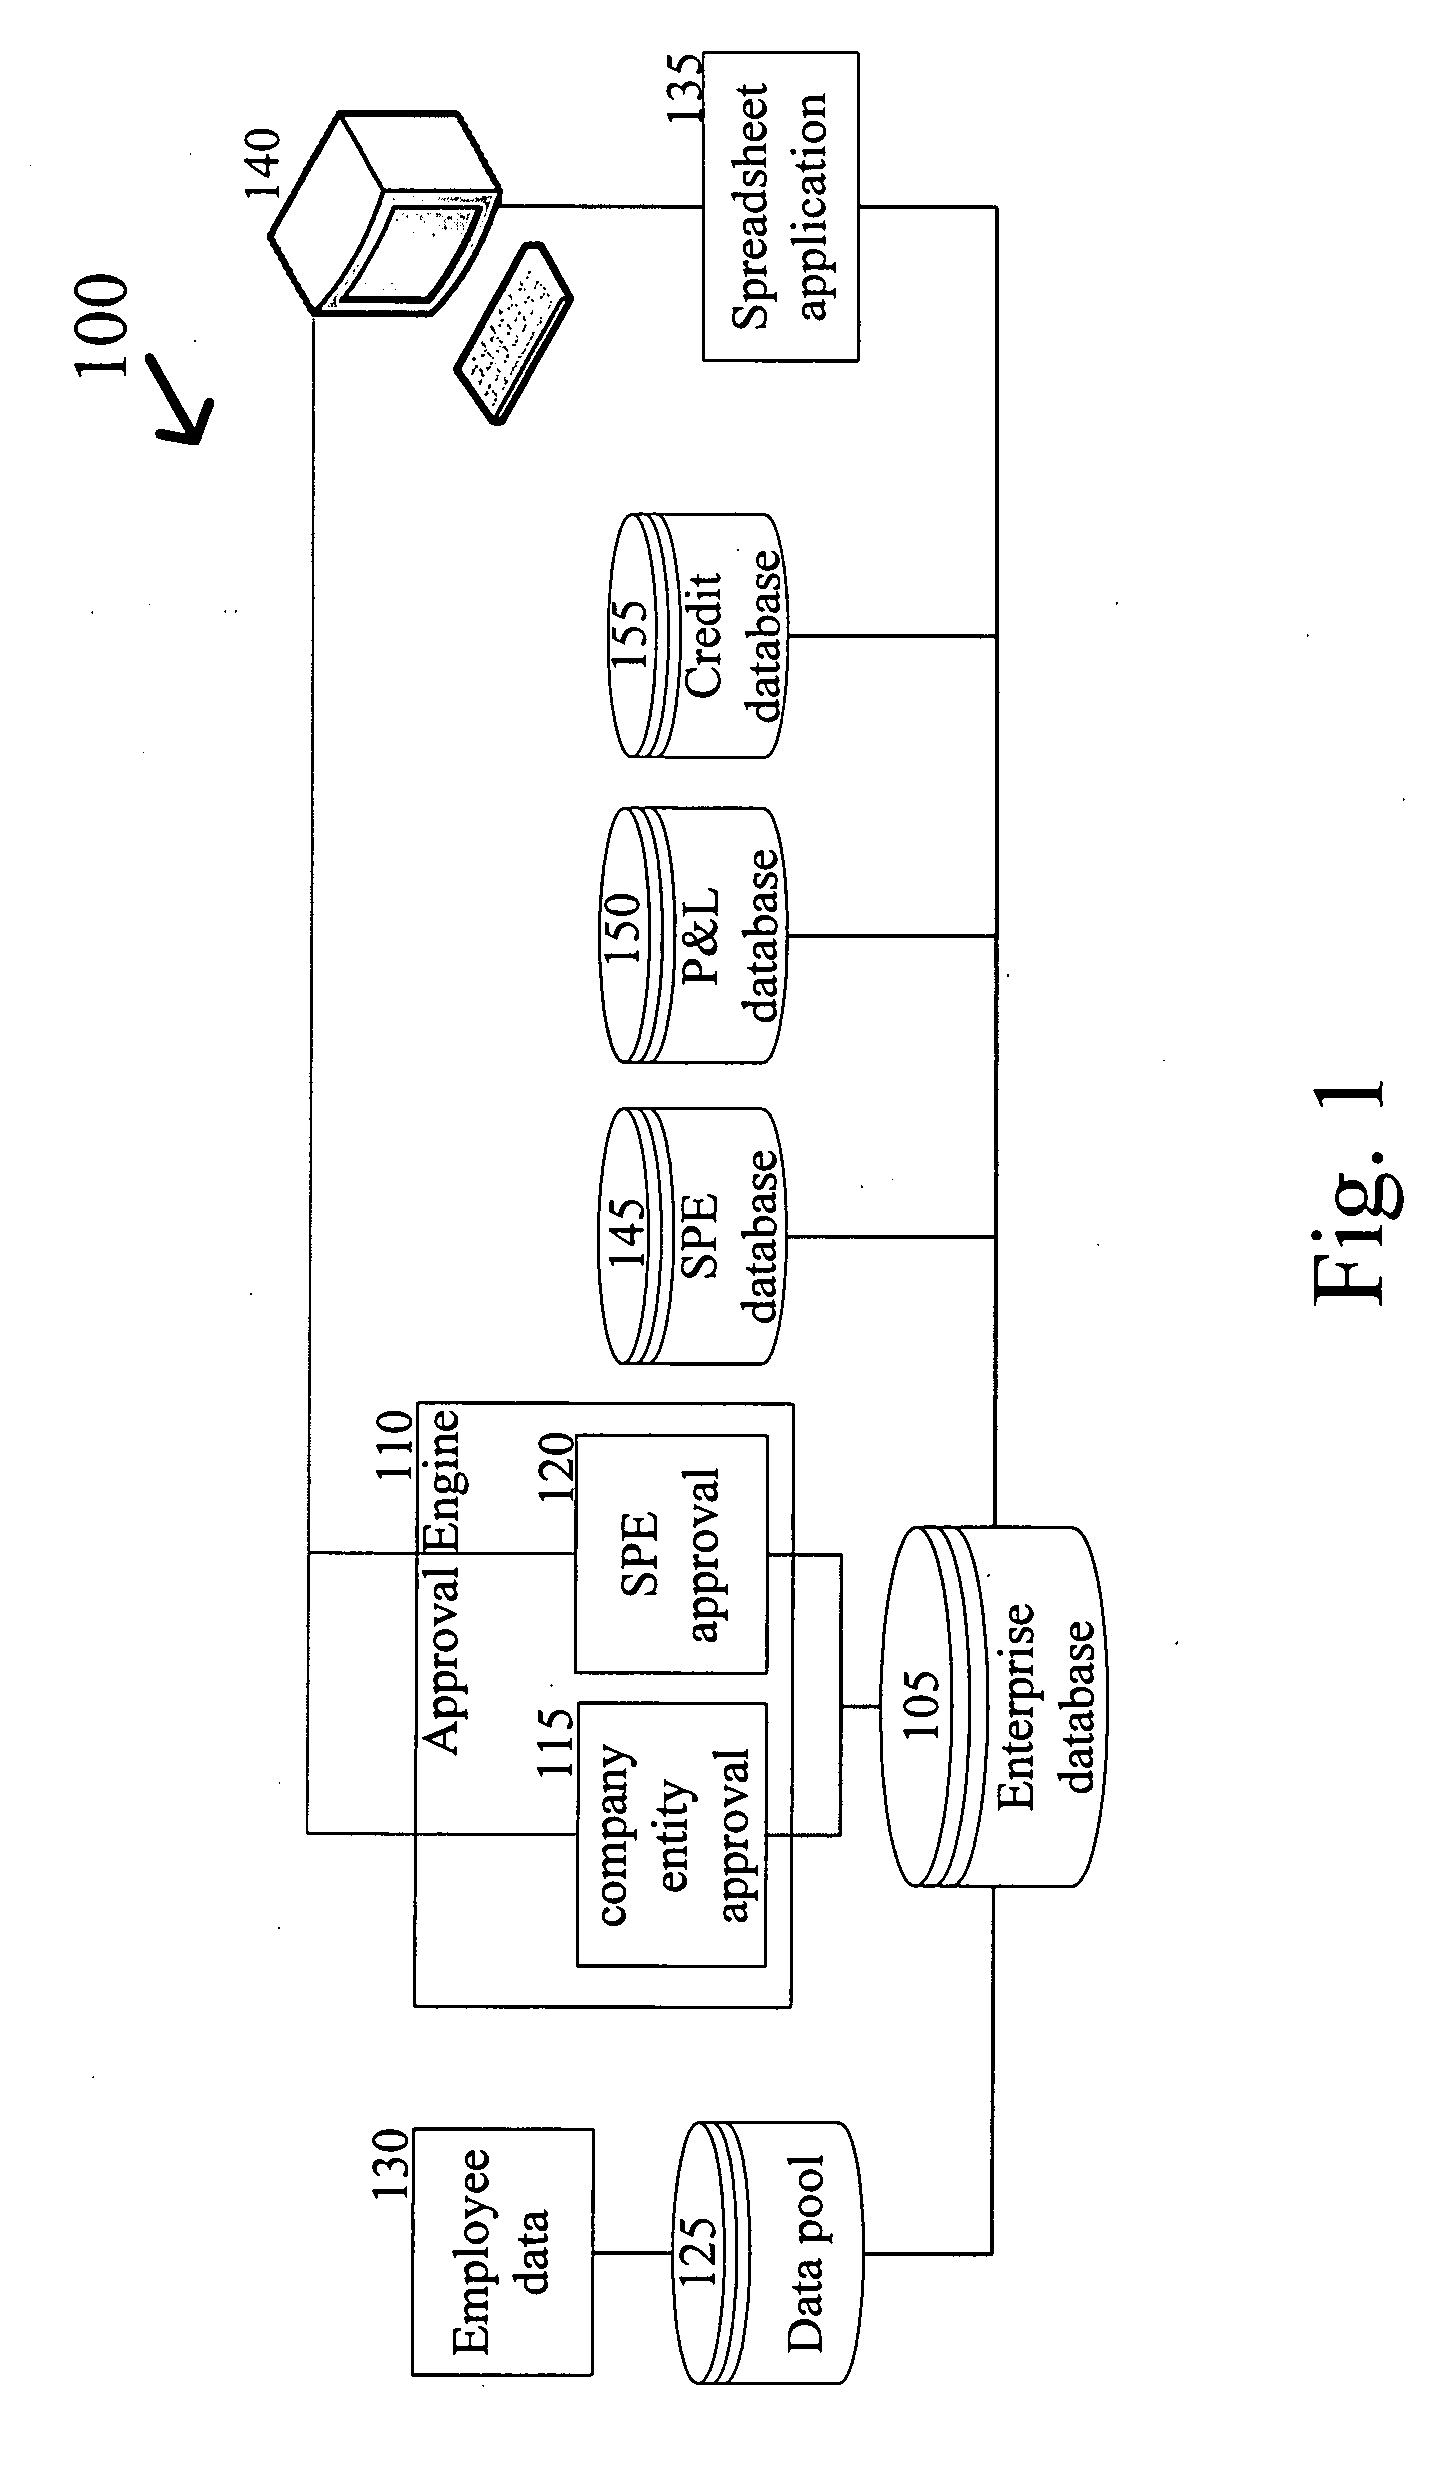 Method and system for monitoring entity data for trigger events and performing entity reassessments related thereto